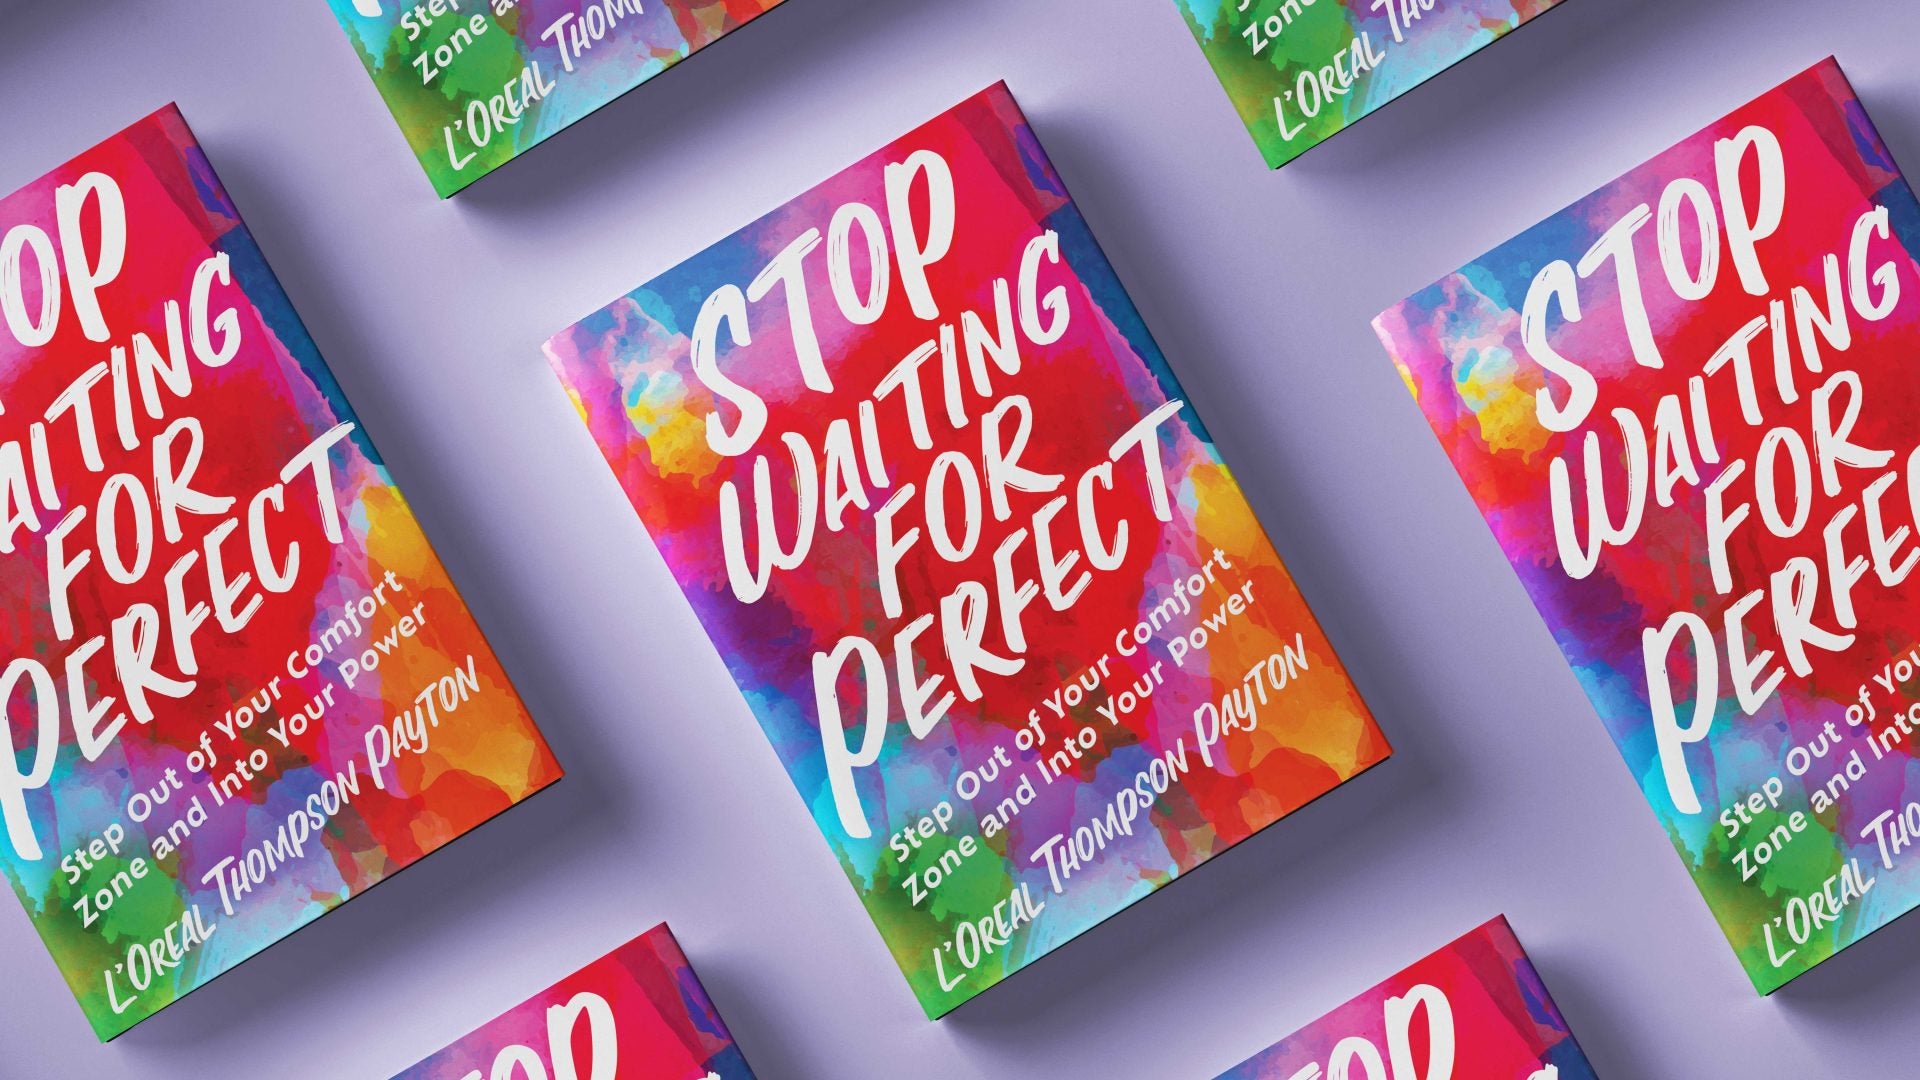 L'Oreal Thompson Payton’s 'Stop Waiting for Perfect' Is A Love Letter To Black Women Recovering From Perfectionism